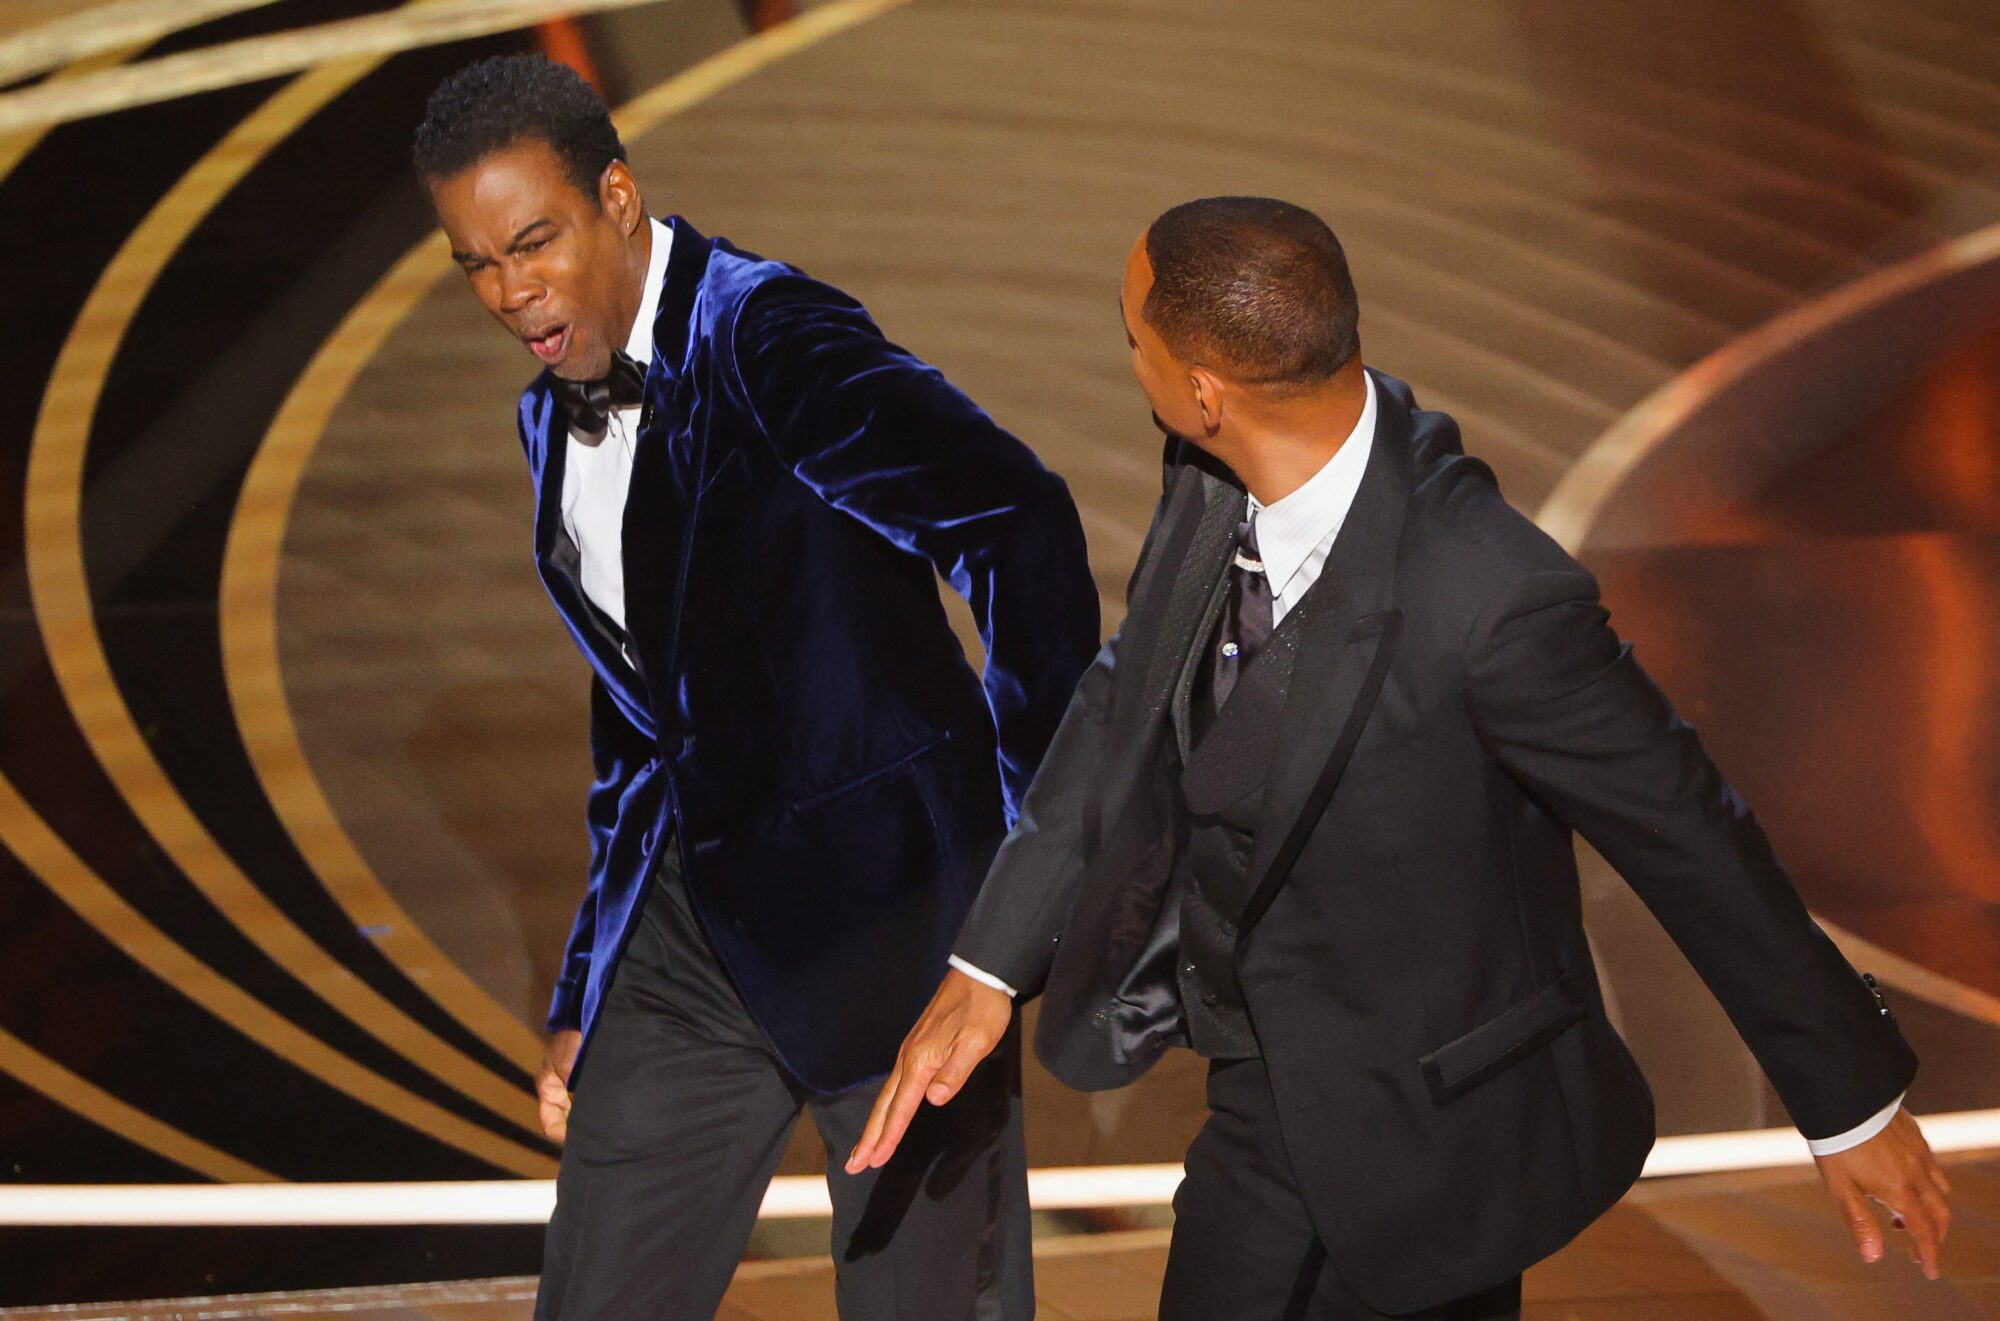 Will Smith hits Chris Rock as Rock spoke on stage during the 94th Academy Awards in Hollywood, Los Angeles, California, U.S., March 27, 2022. REUTERS/Brian Snyder